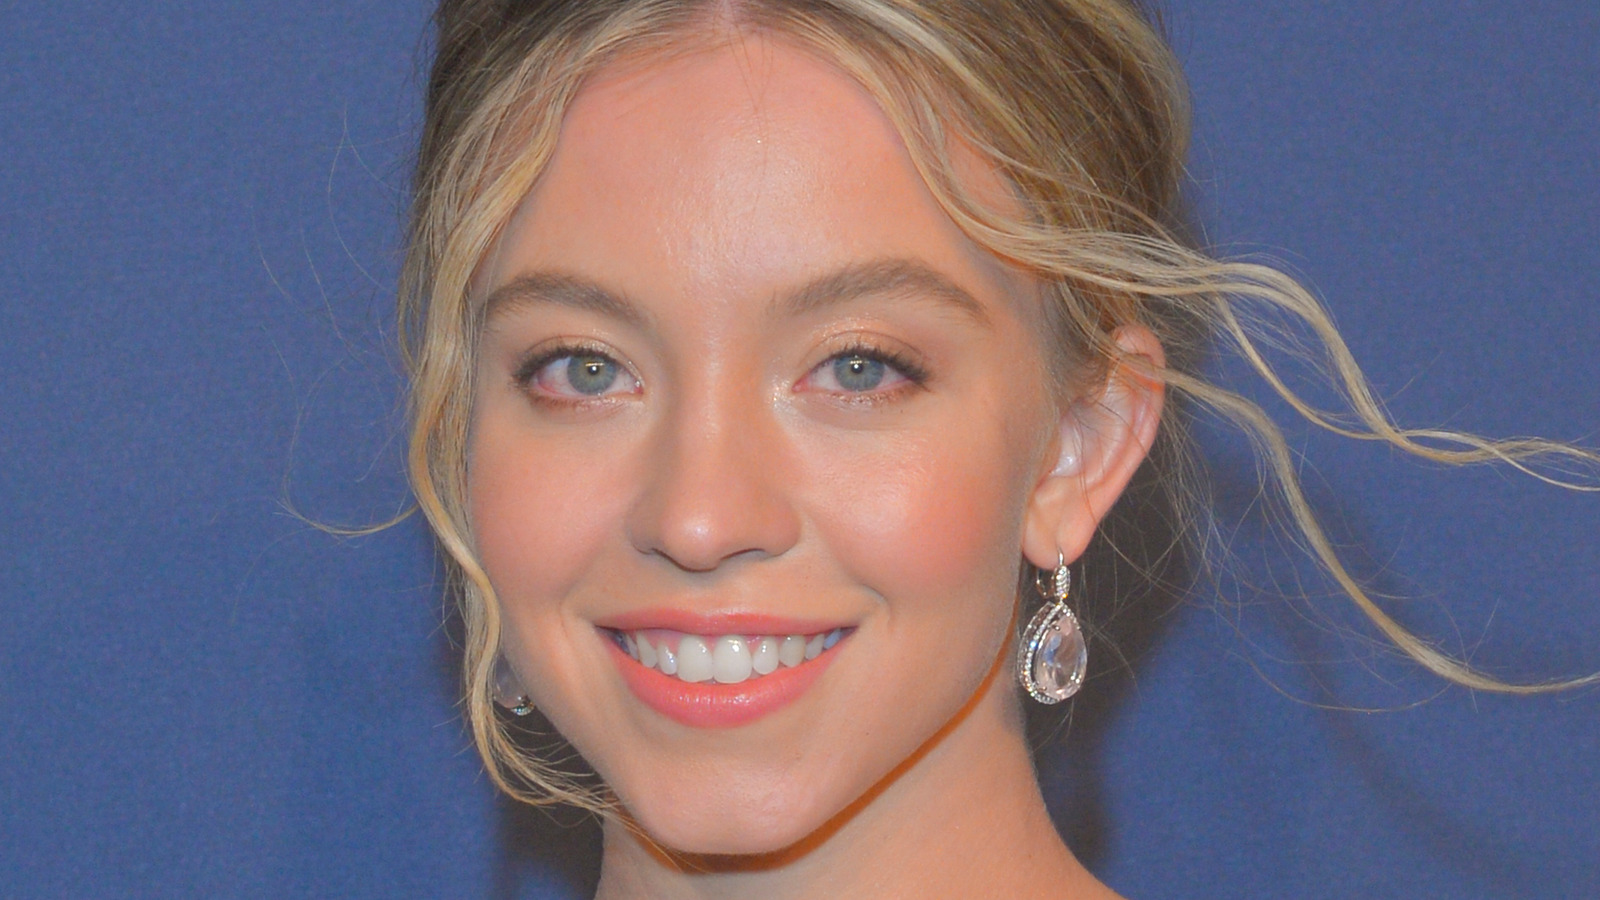 What We Know About Sydney Sweeney